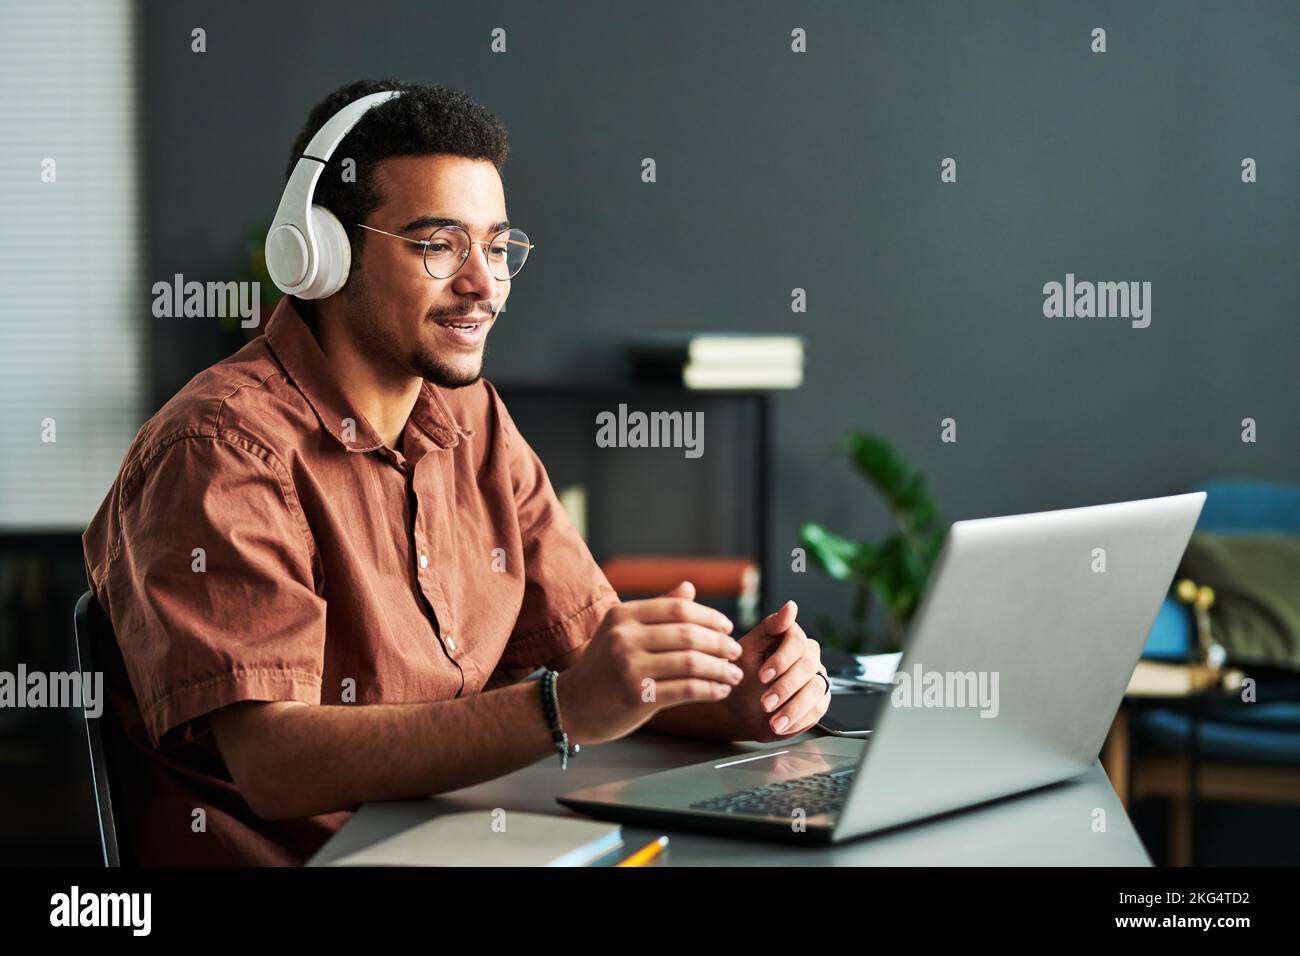 Young confident student in headphones communicating with online audience or teacher while sitting by desk in front of laptop Stock Photo